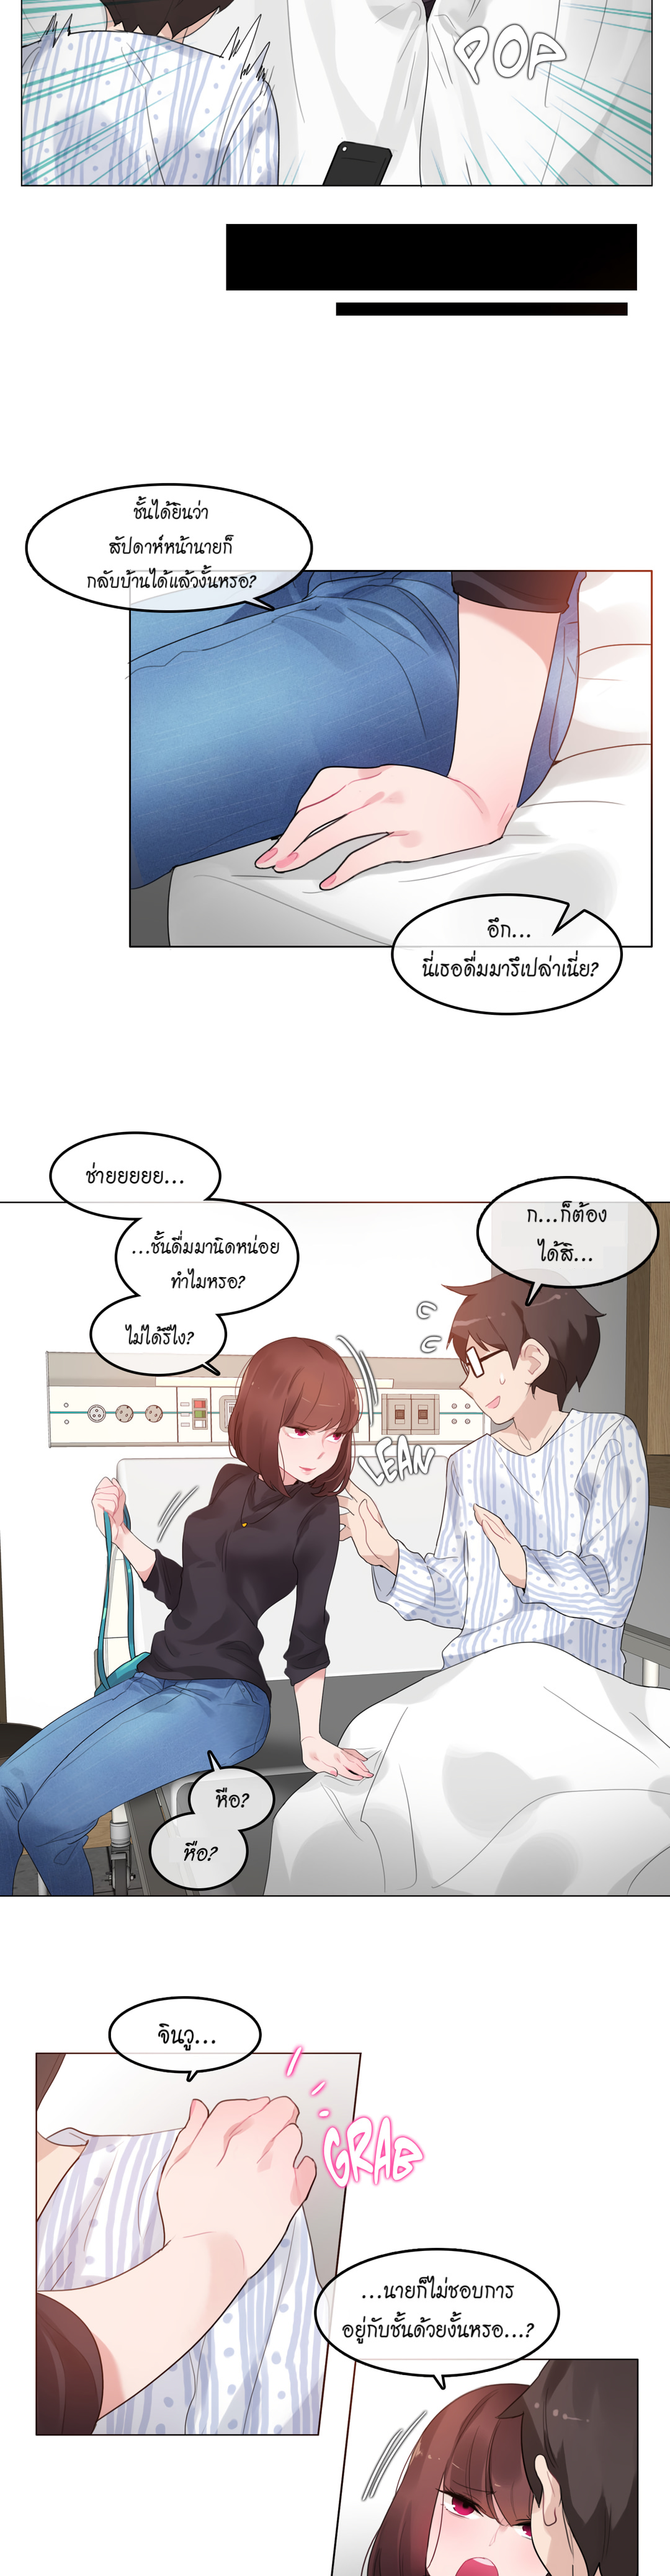 A Pervert’s Daily Life50 (8)